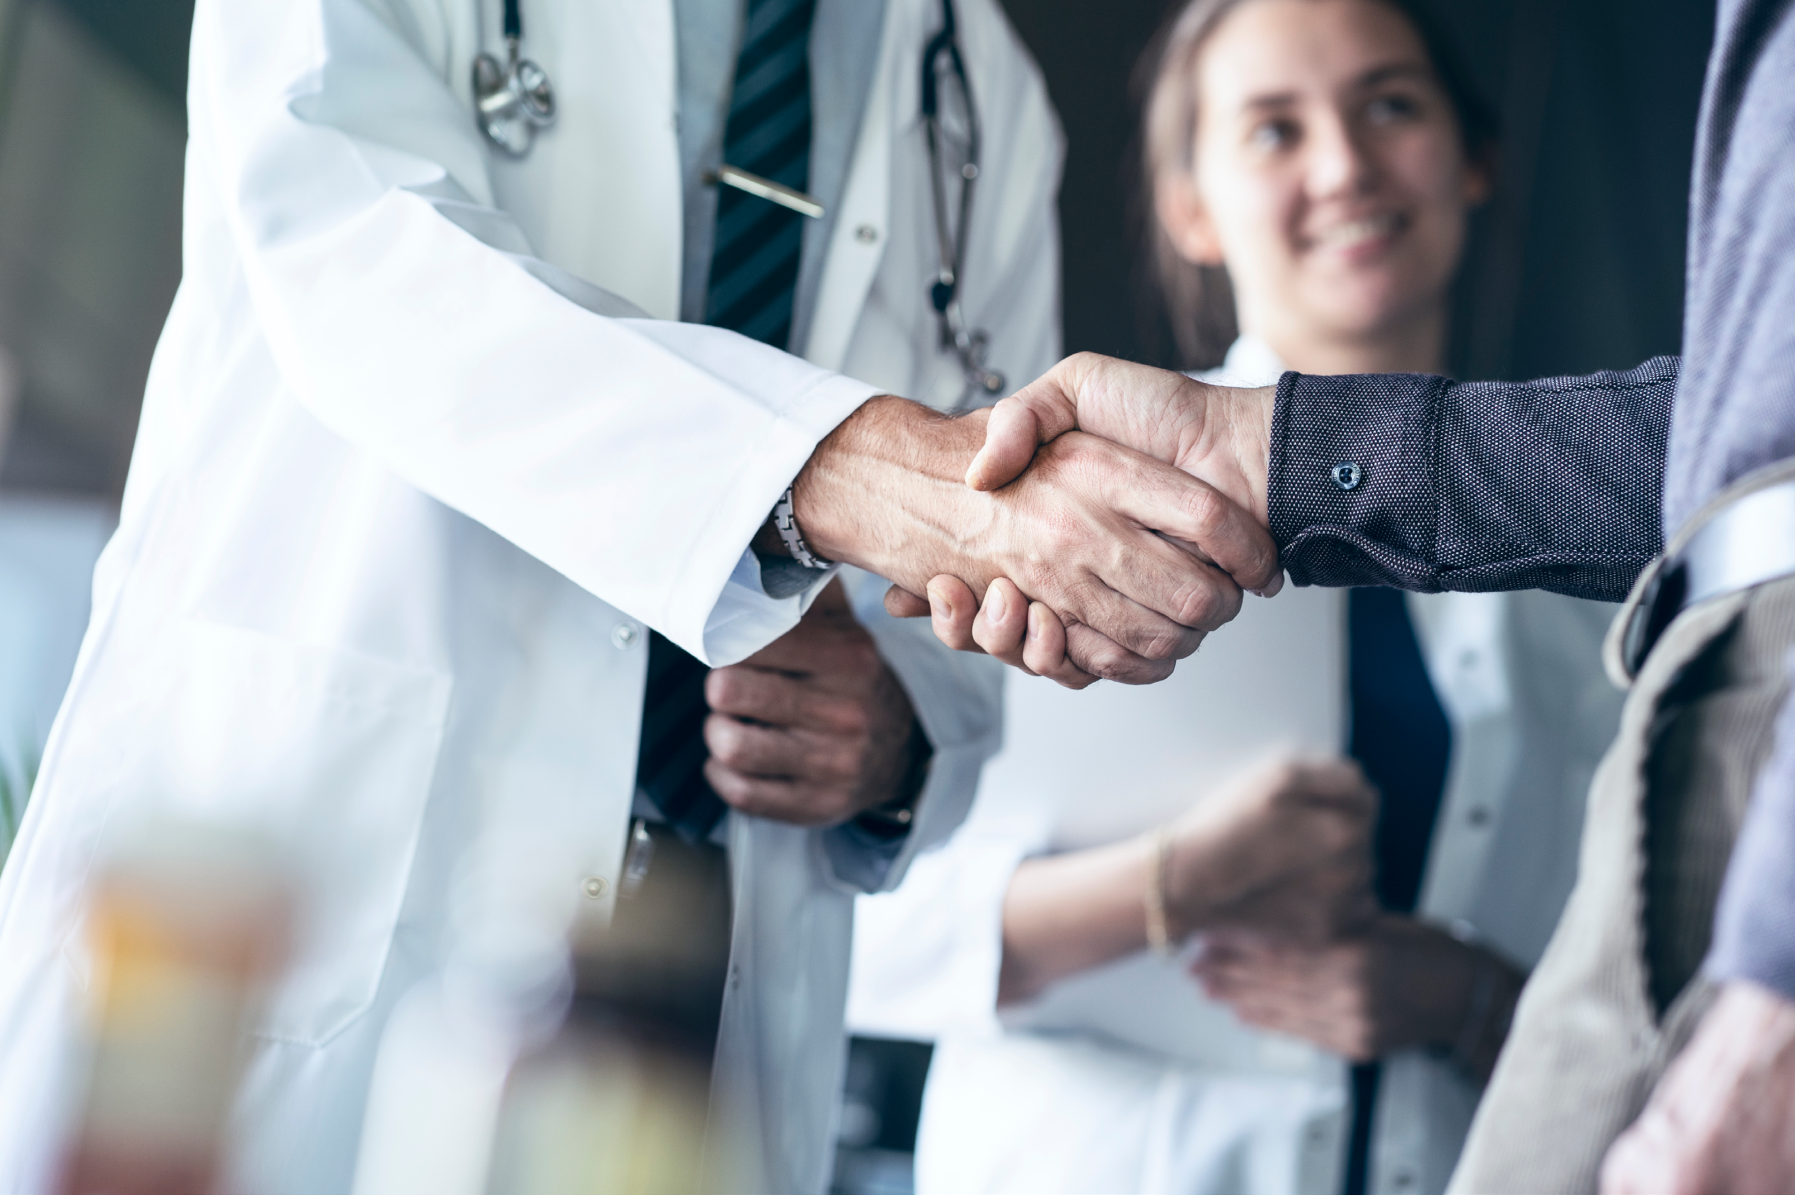 Doctor shaking hands with another person.